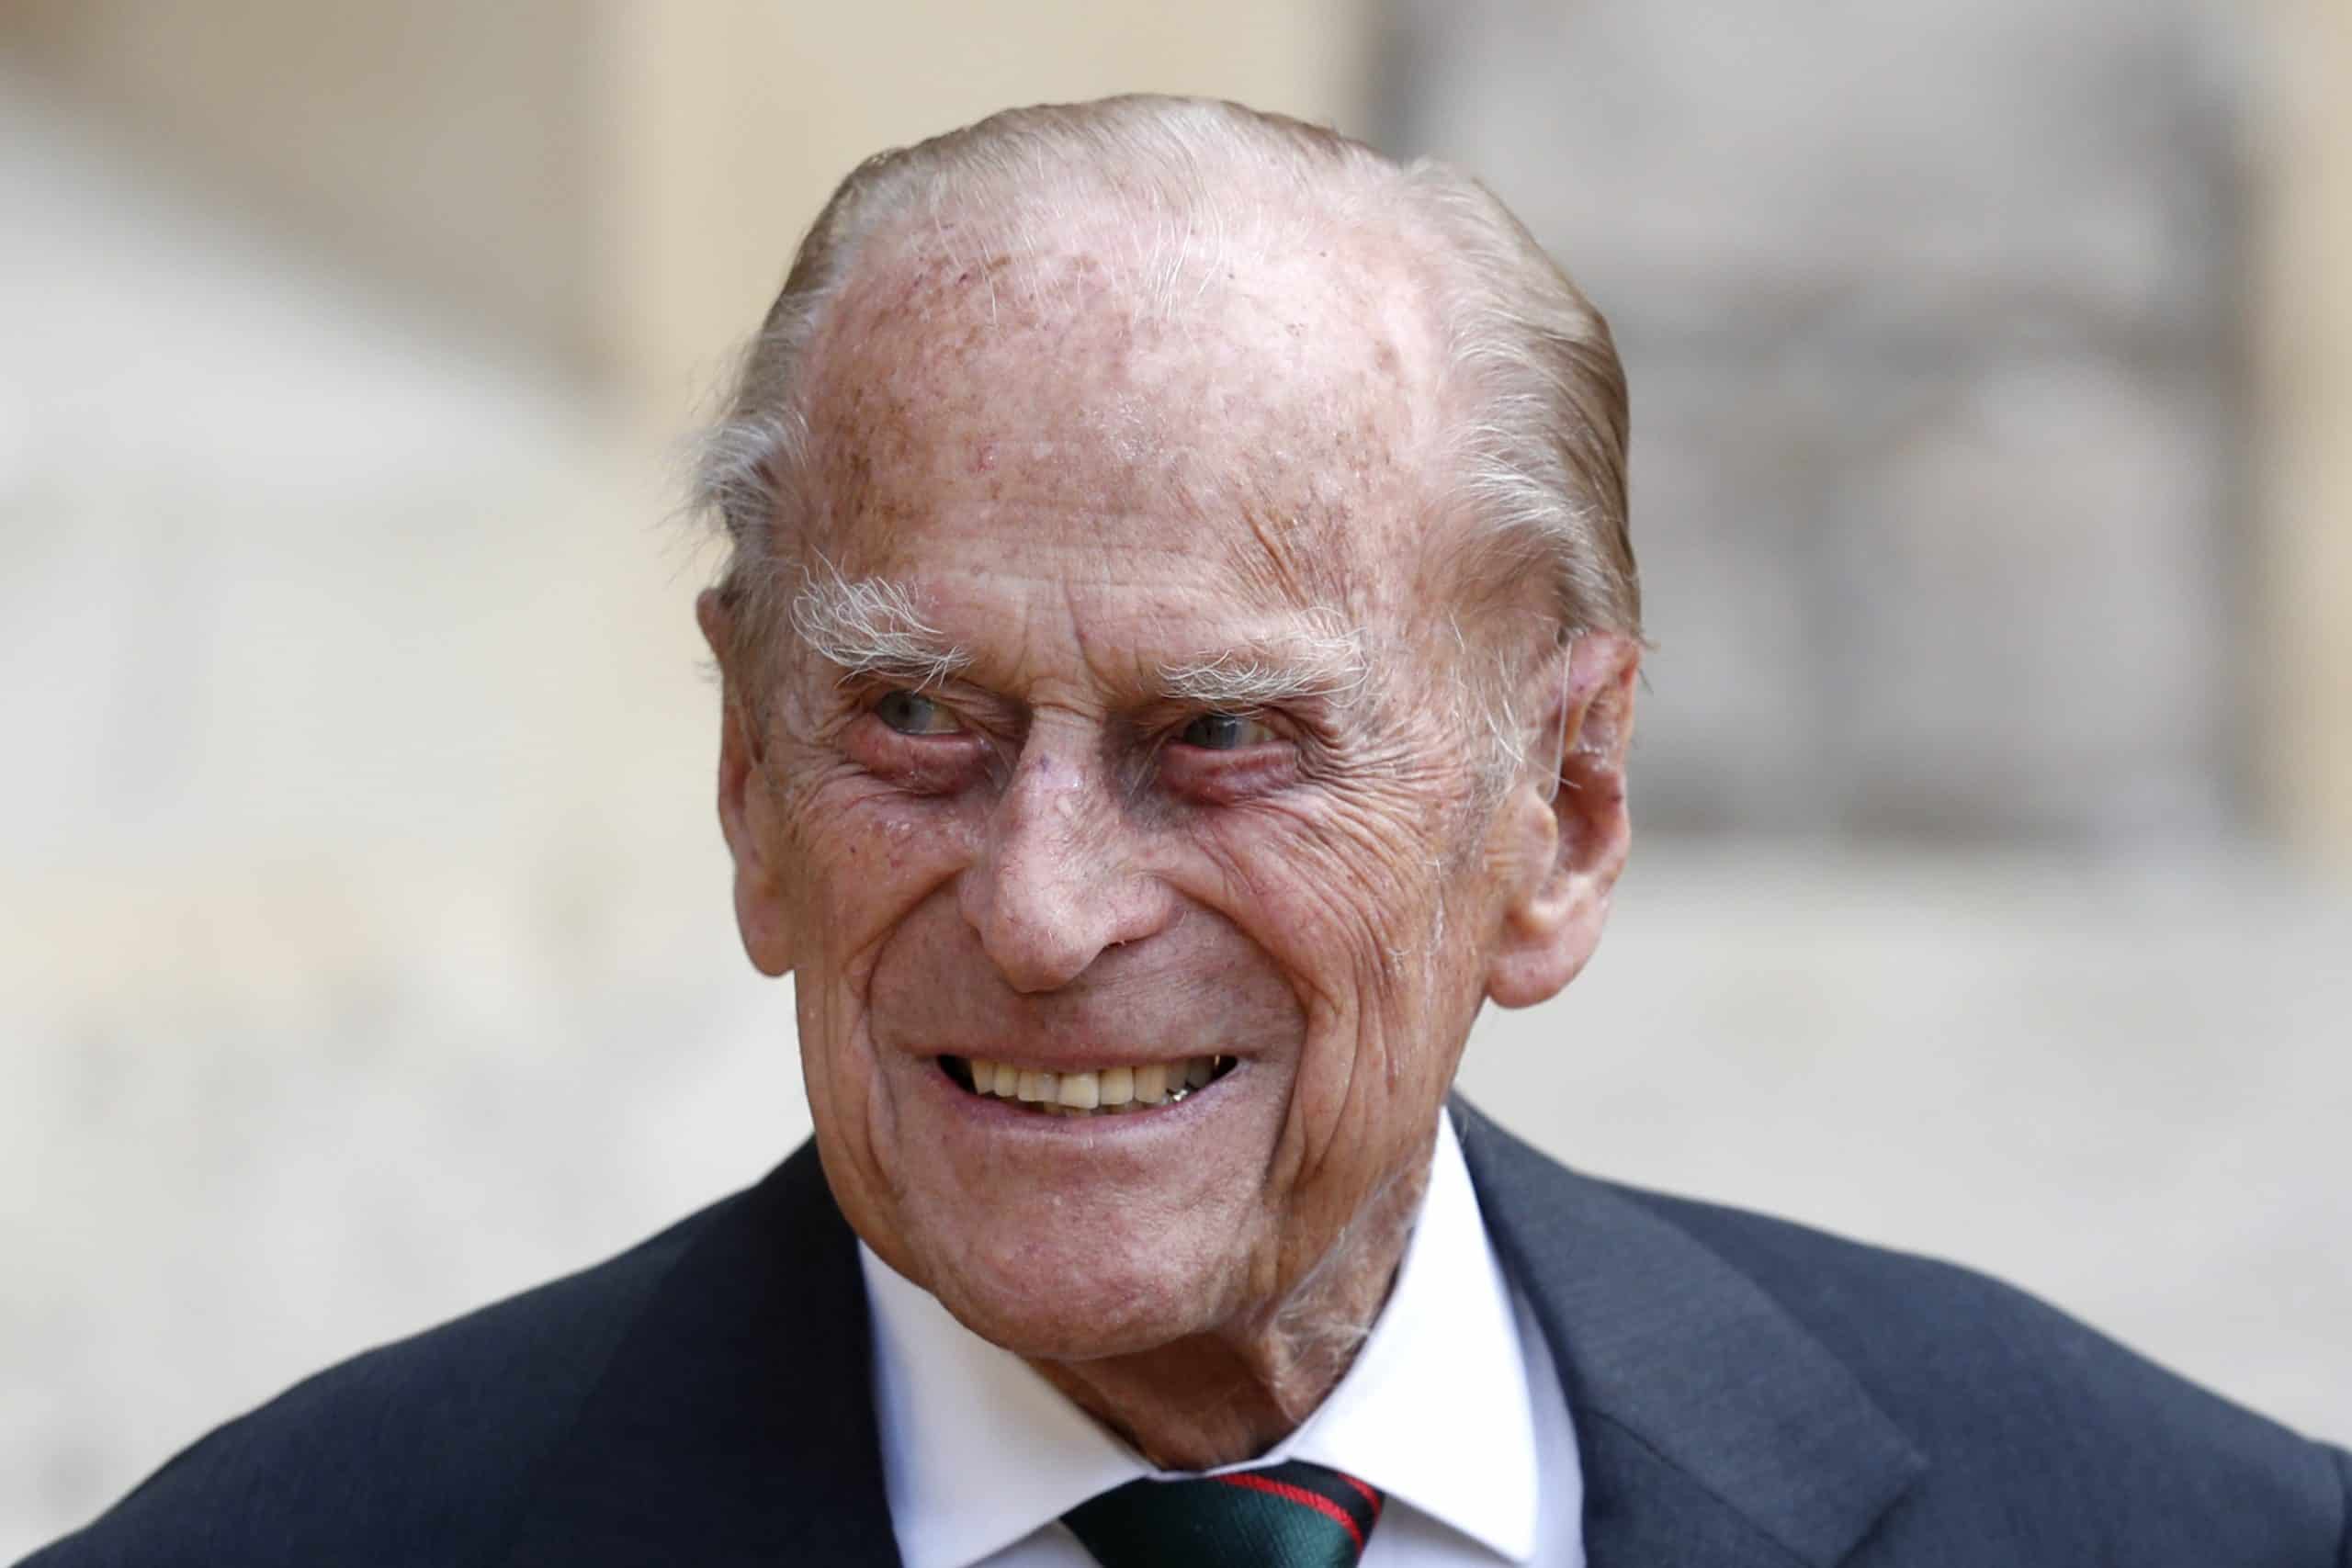 How the Covid-19 crisis will impact Prince Philip’s funeral